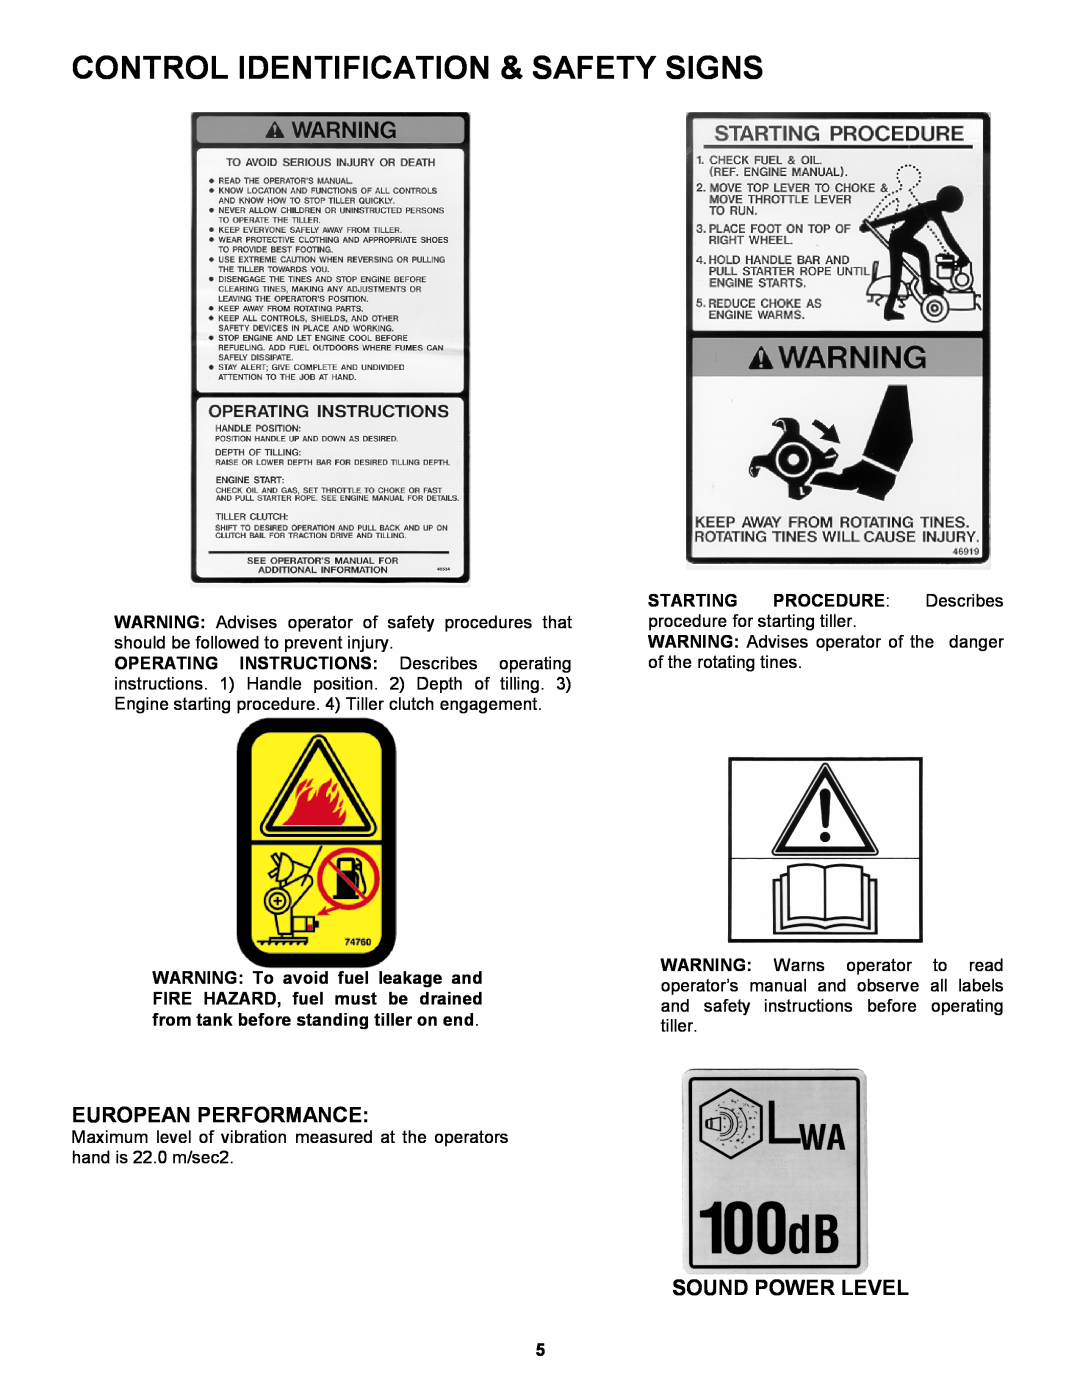 Snapper EICFR5505BV Control Identification & Safety Signs, European Performance, Sound Power Level 